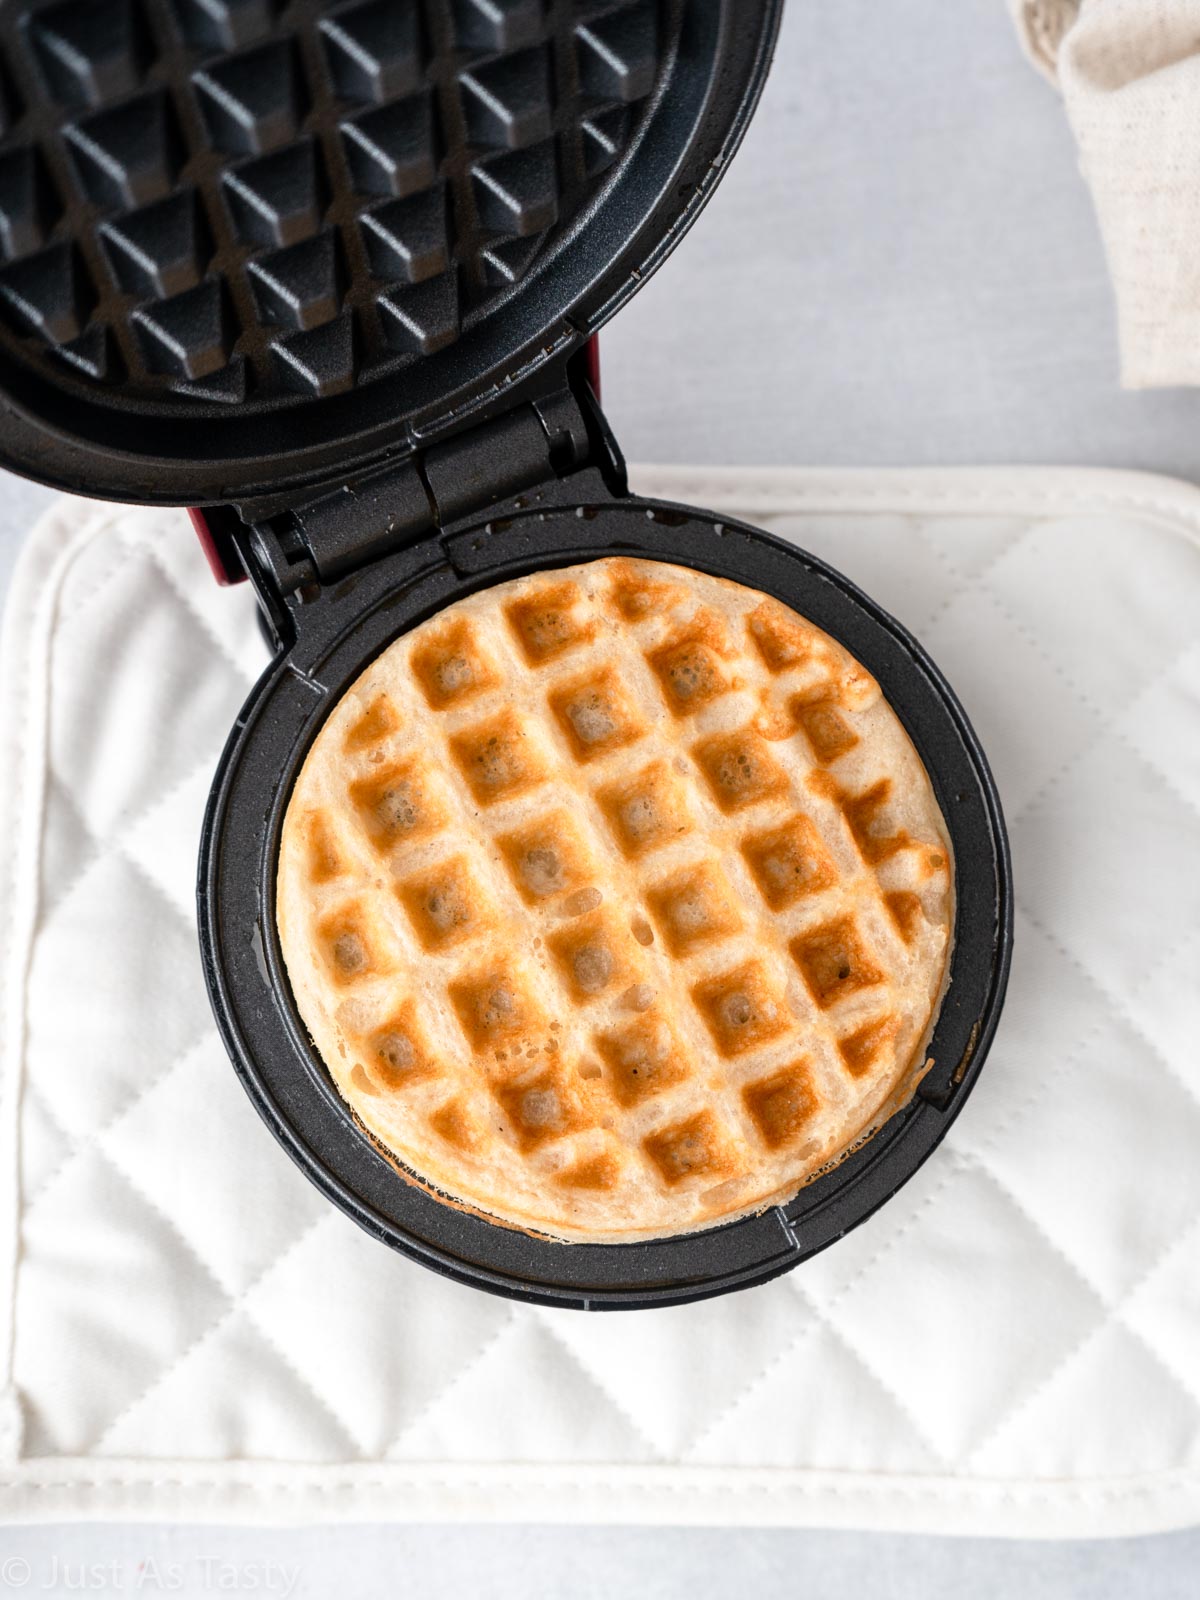 Cooked waffle in a waffle iron.